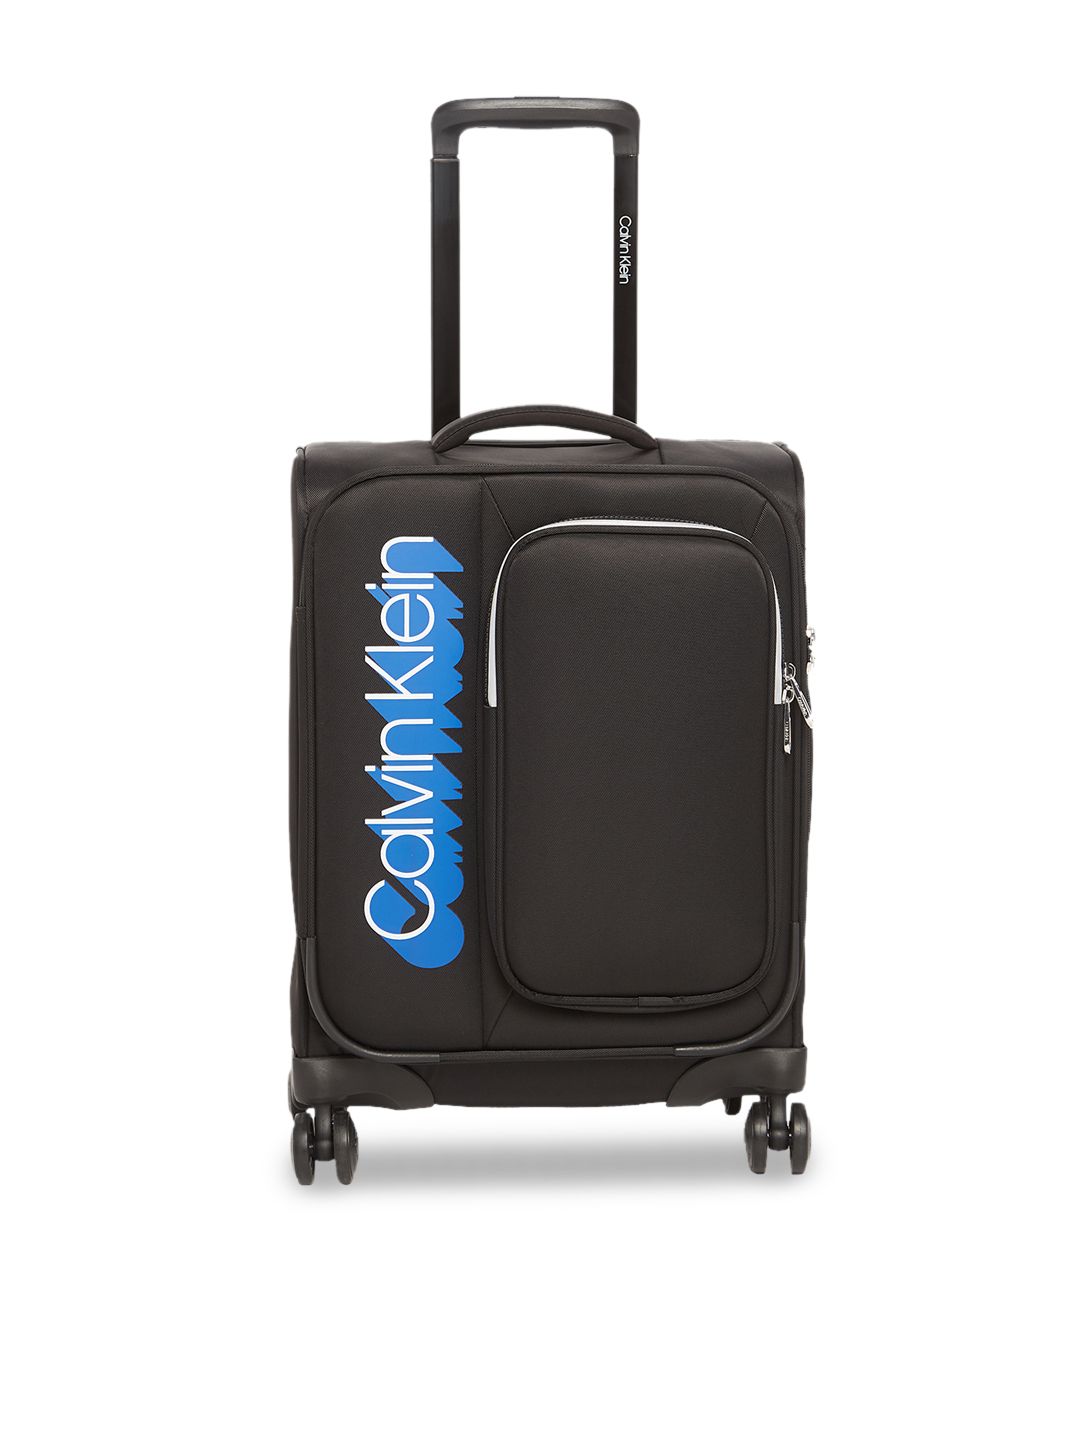 Calvin Klein Black Solid Sky Shadow 360-Degree Rotation Soft-Sided Cabin Trolley Suitcase Price in India